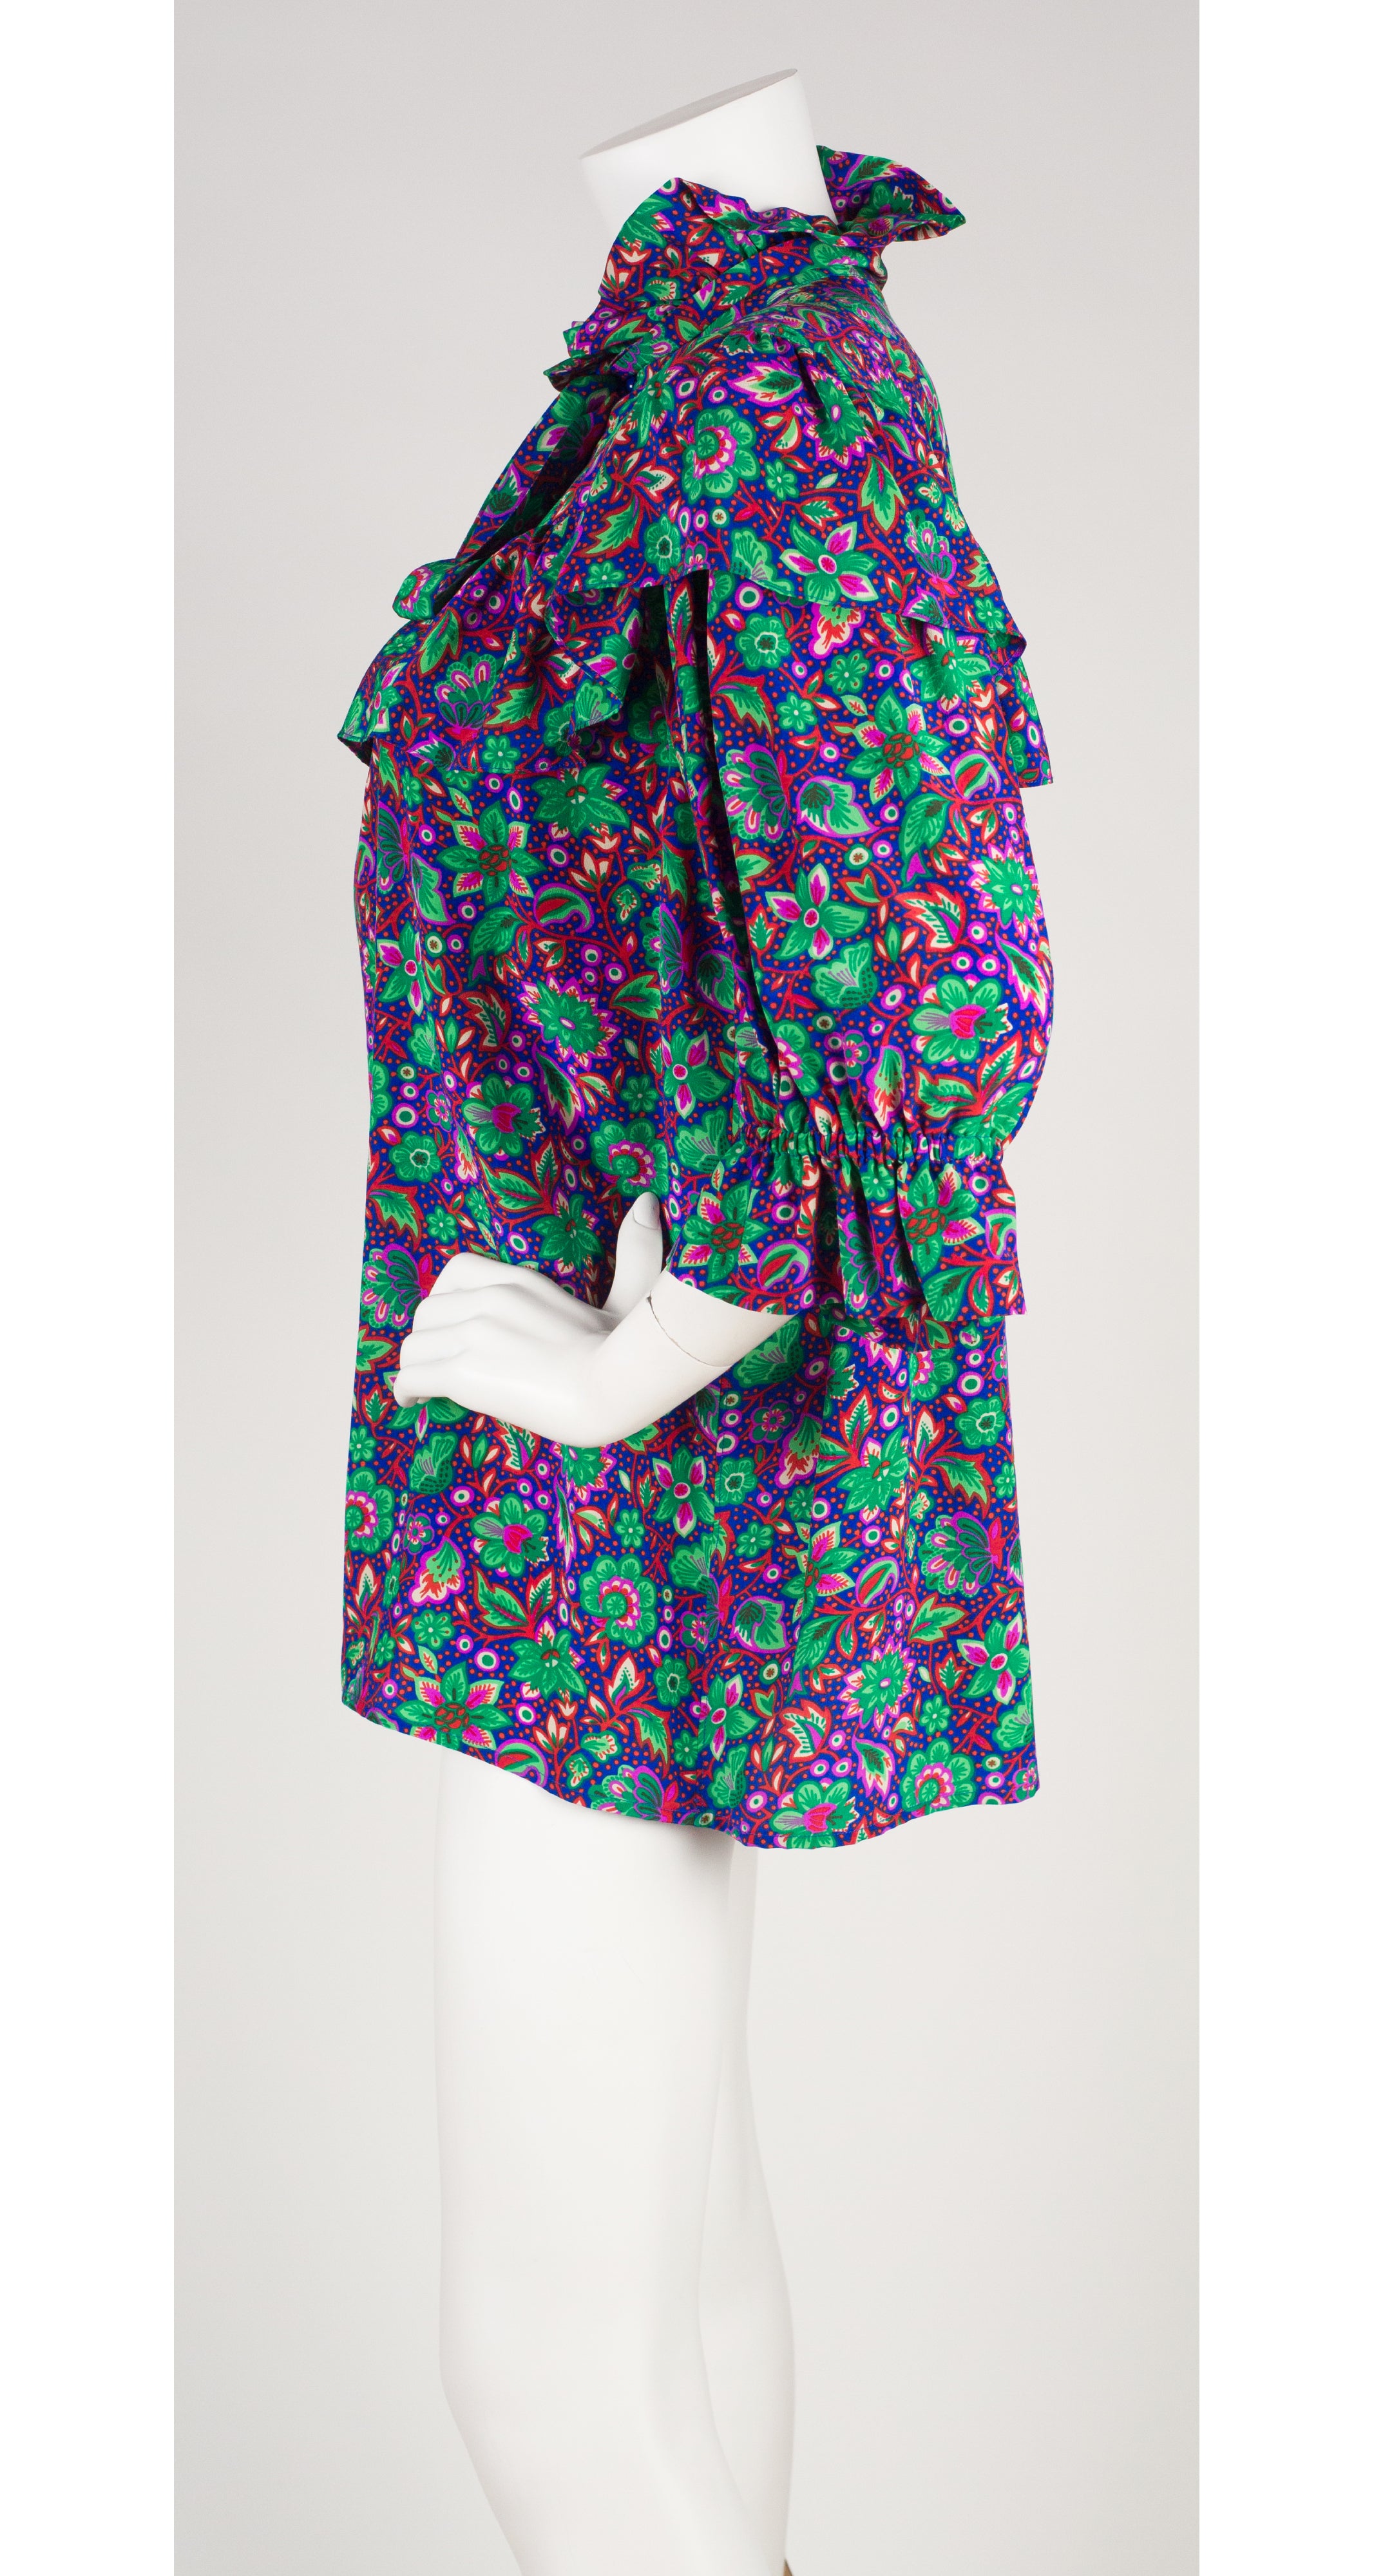 1983 S/S Floral Silk Ruffle Tie-Neck Blouse